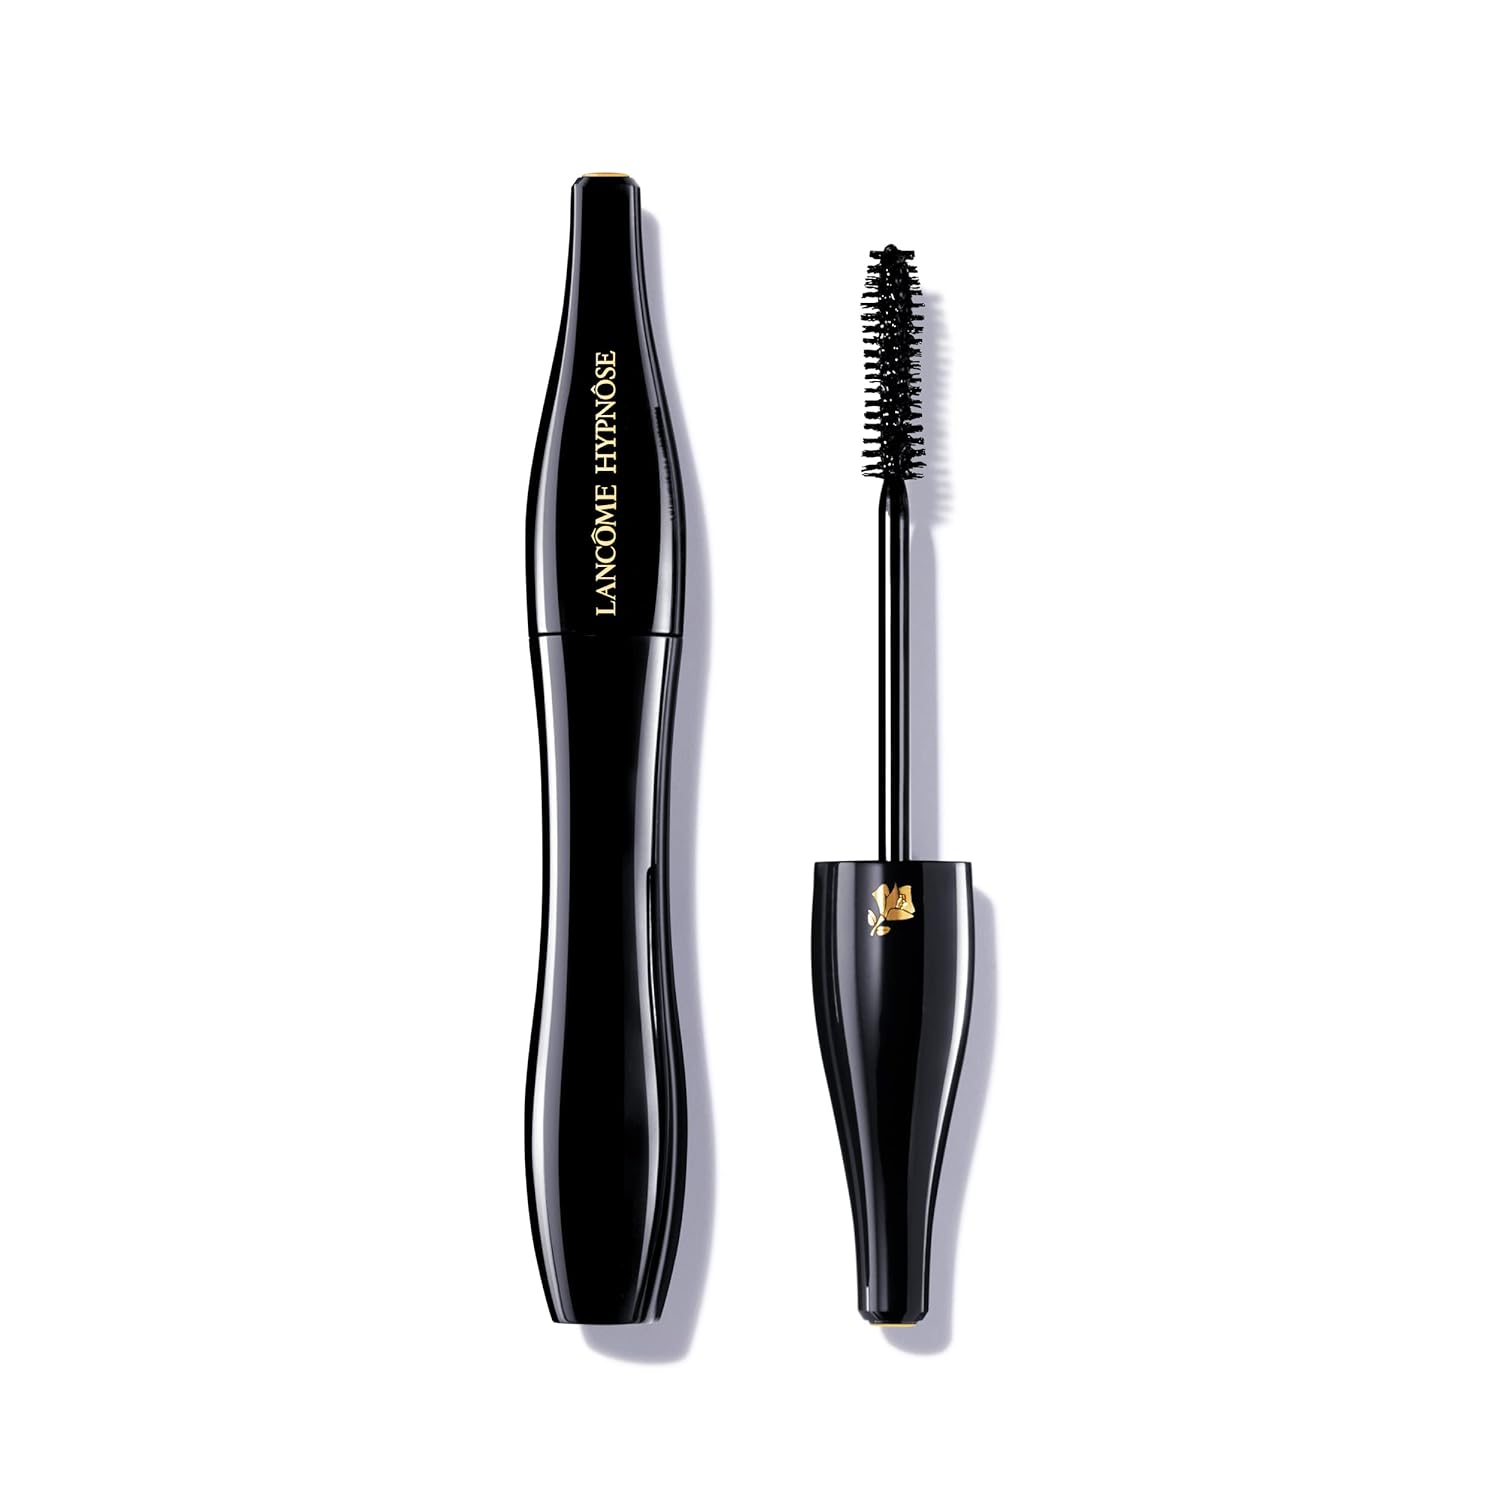 Lancôme Hypnôse Buildable & Voluminizing Mascara - Customizable Volume for a Natural or Bold Lash Look - No Smudging, Smearing or Flaking